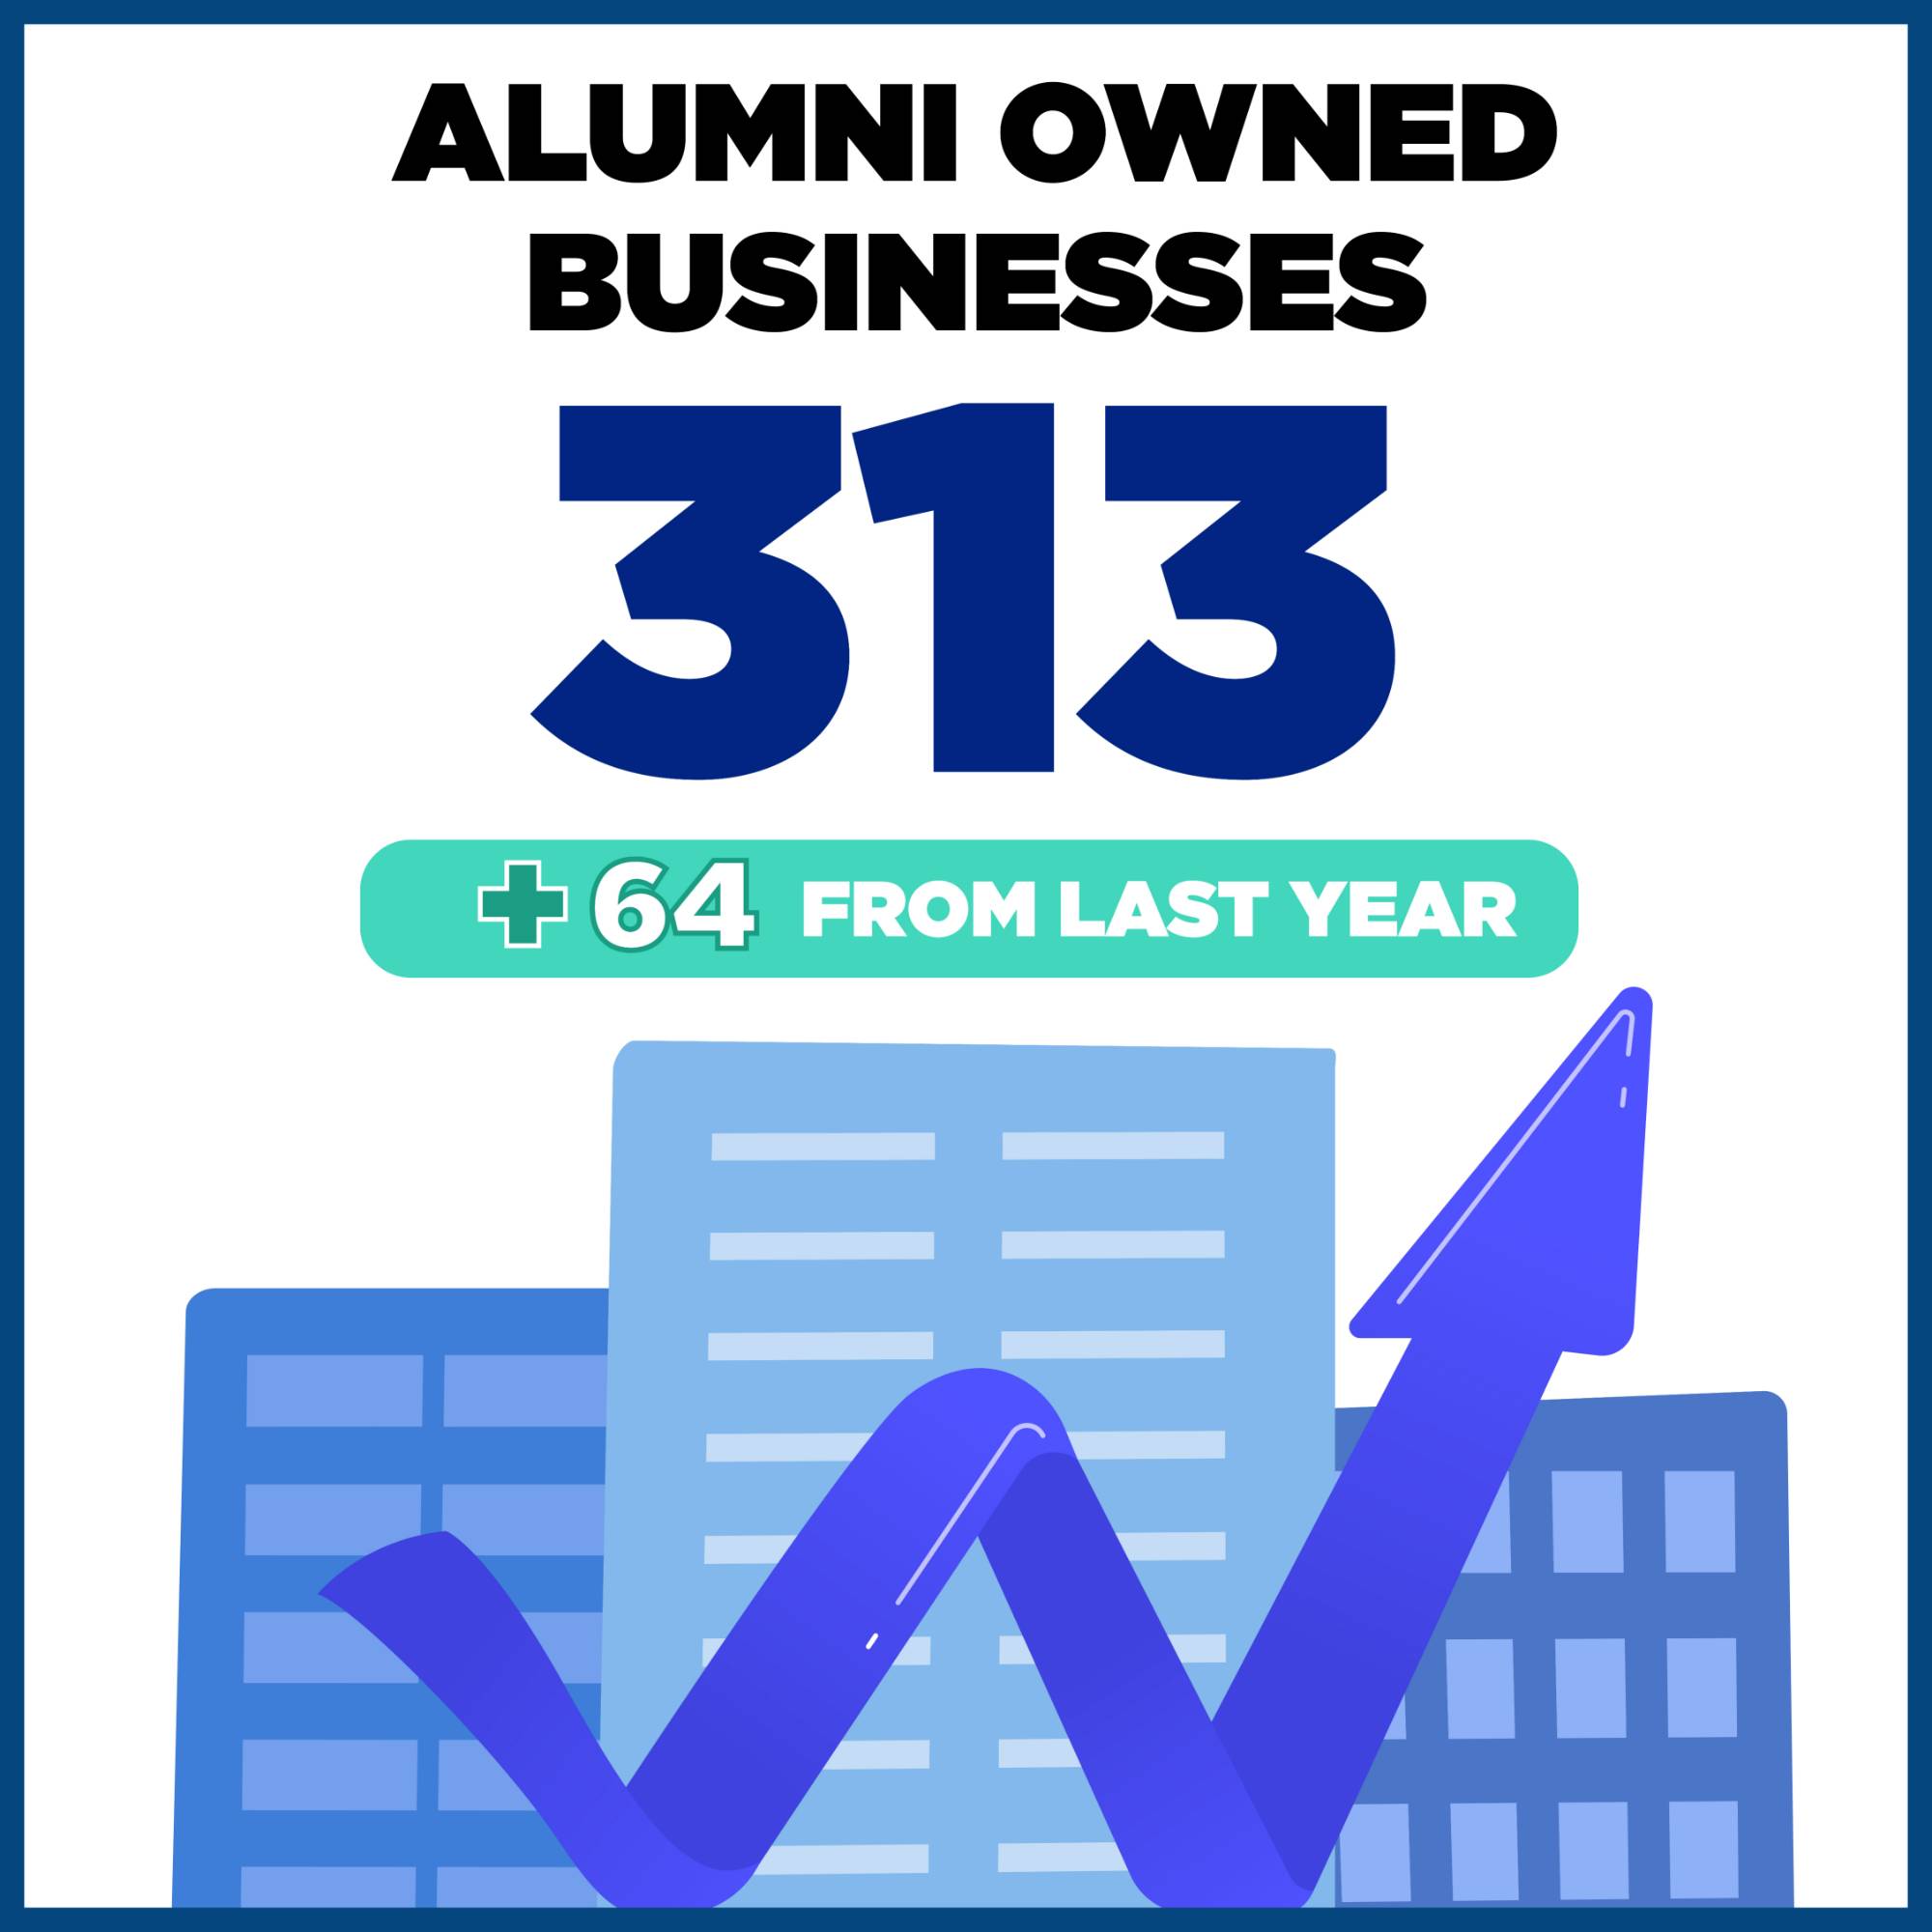 313 Alumni Owned Businesses have been submitted to the AOB listing, a 64 business increase from last year. The number is displayed over a computer illustration of tall city buildings.